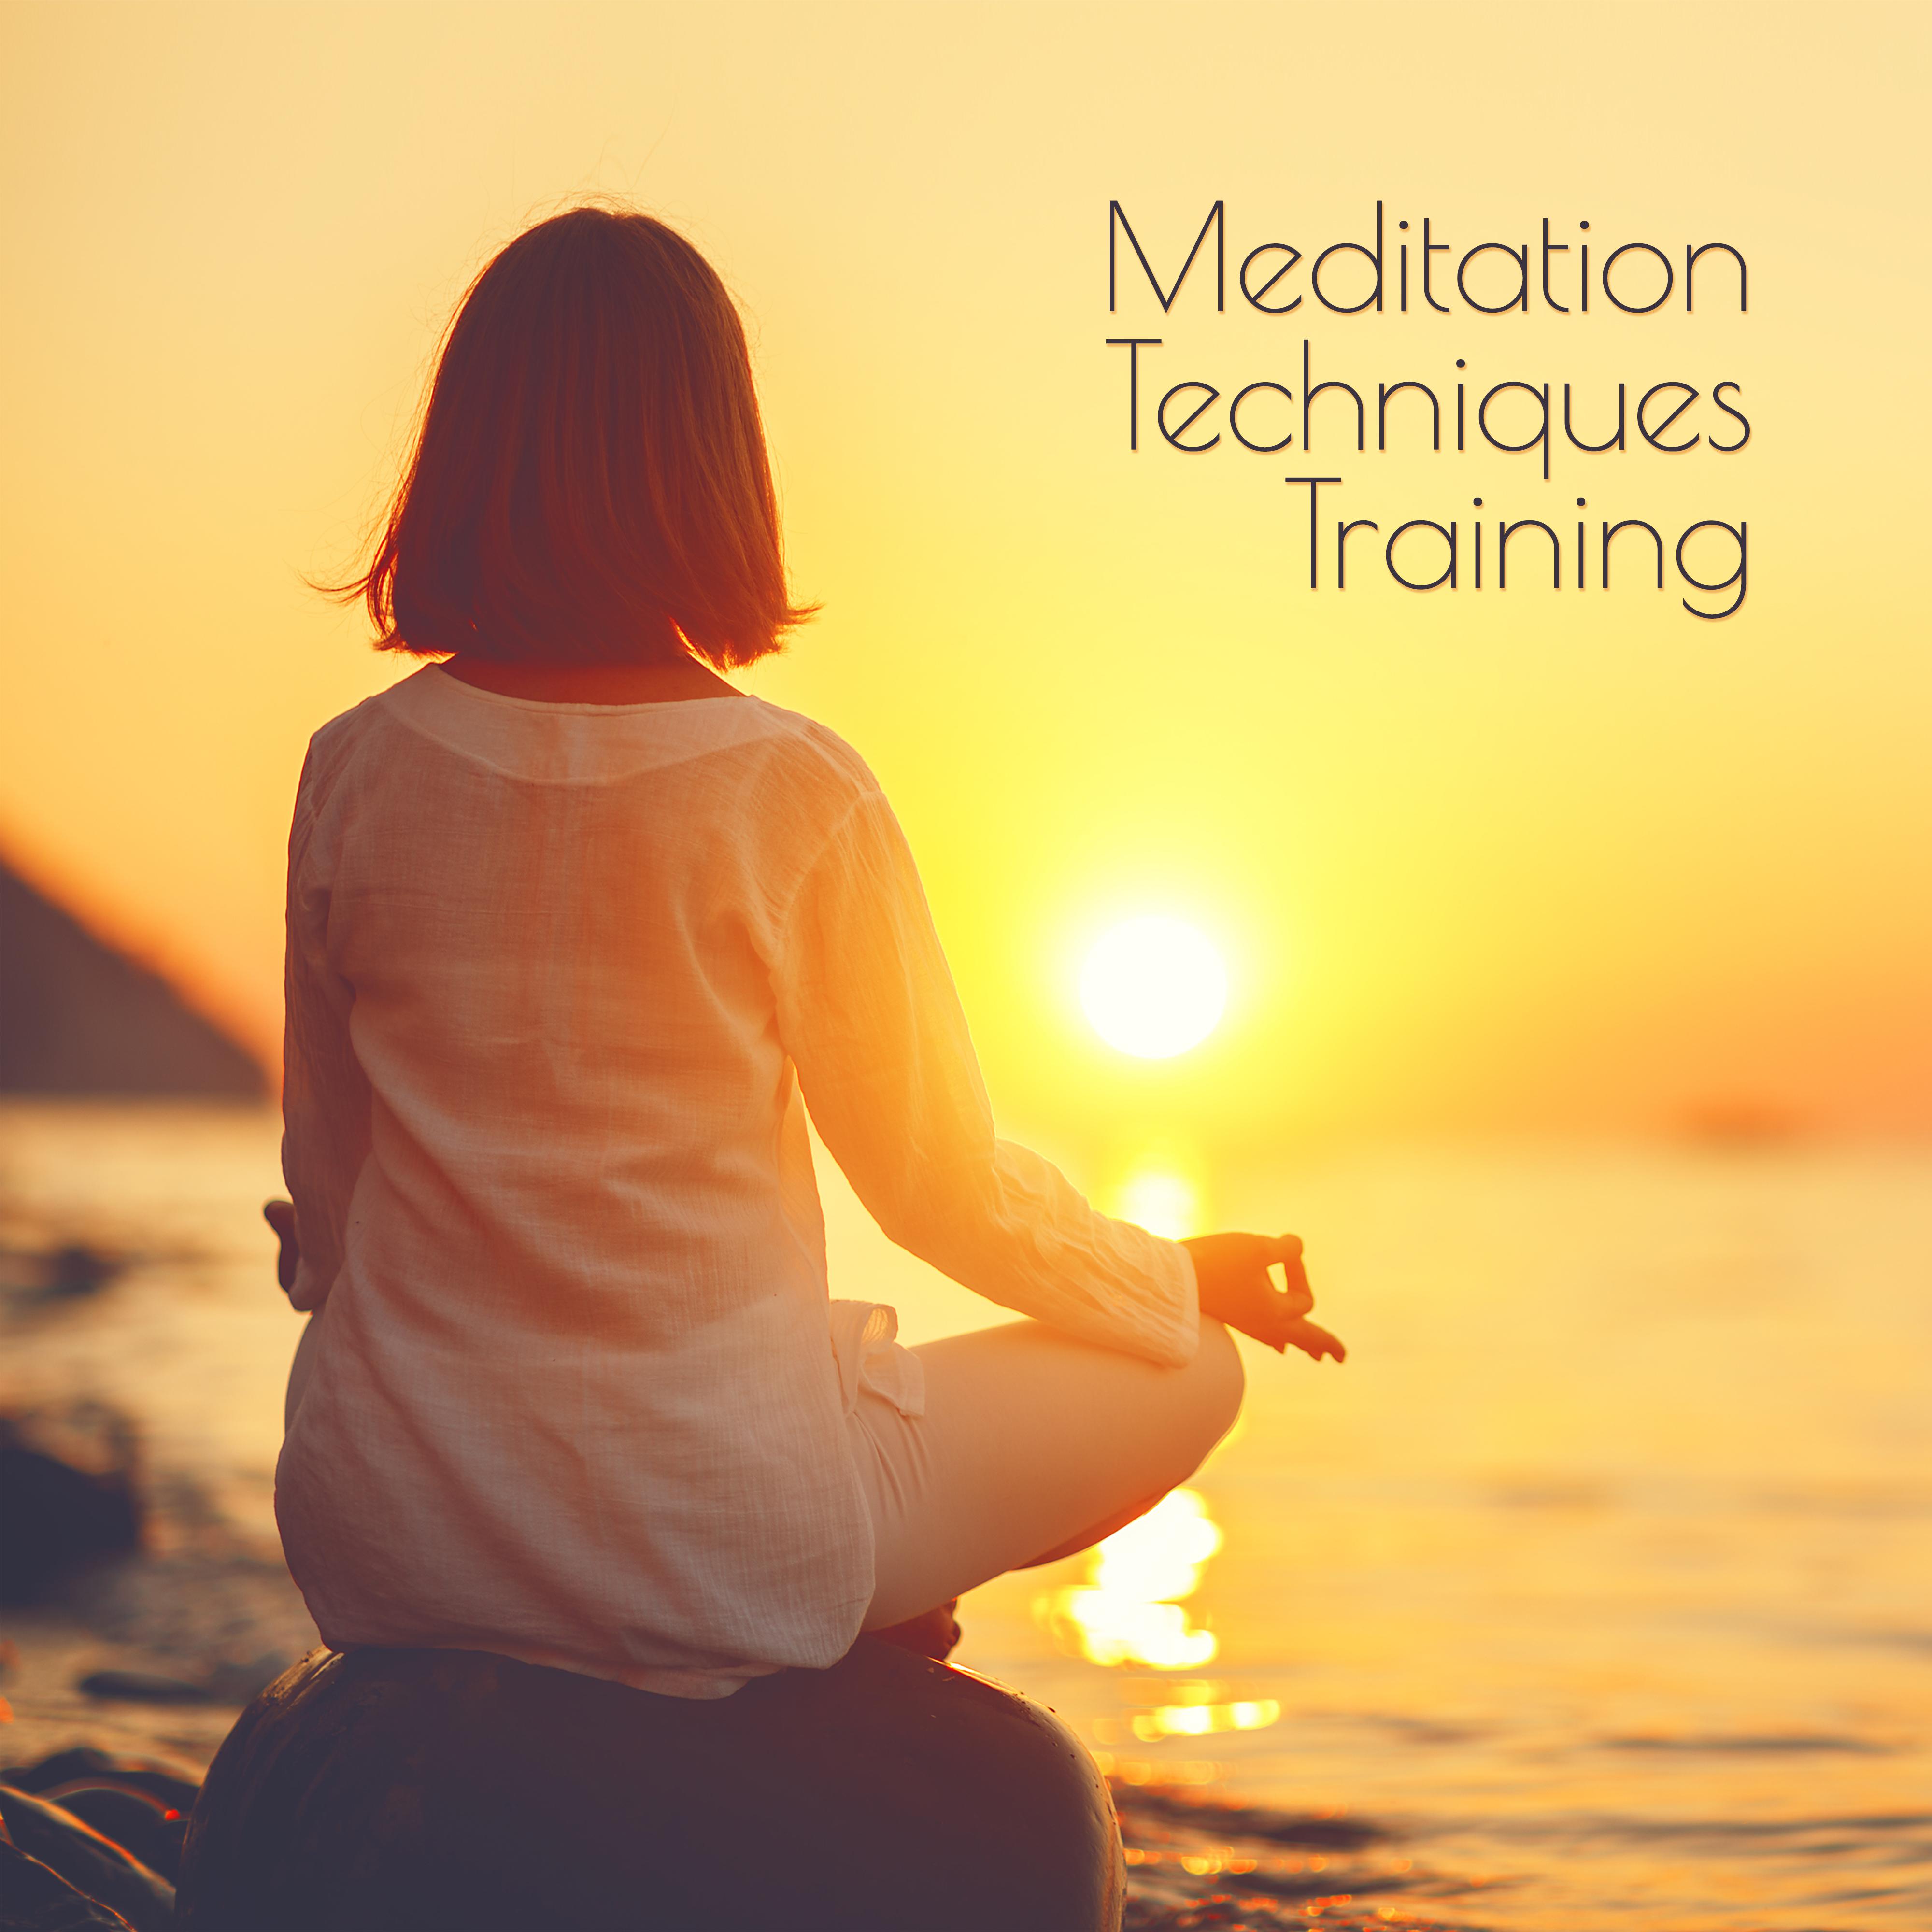 Meditation Techniques Training – 15 New Age Tracks for Yoga Training, Pure Relaxing & Calming Down